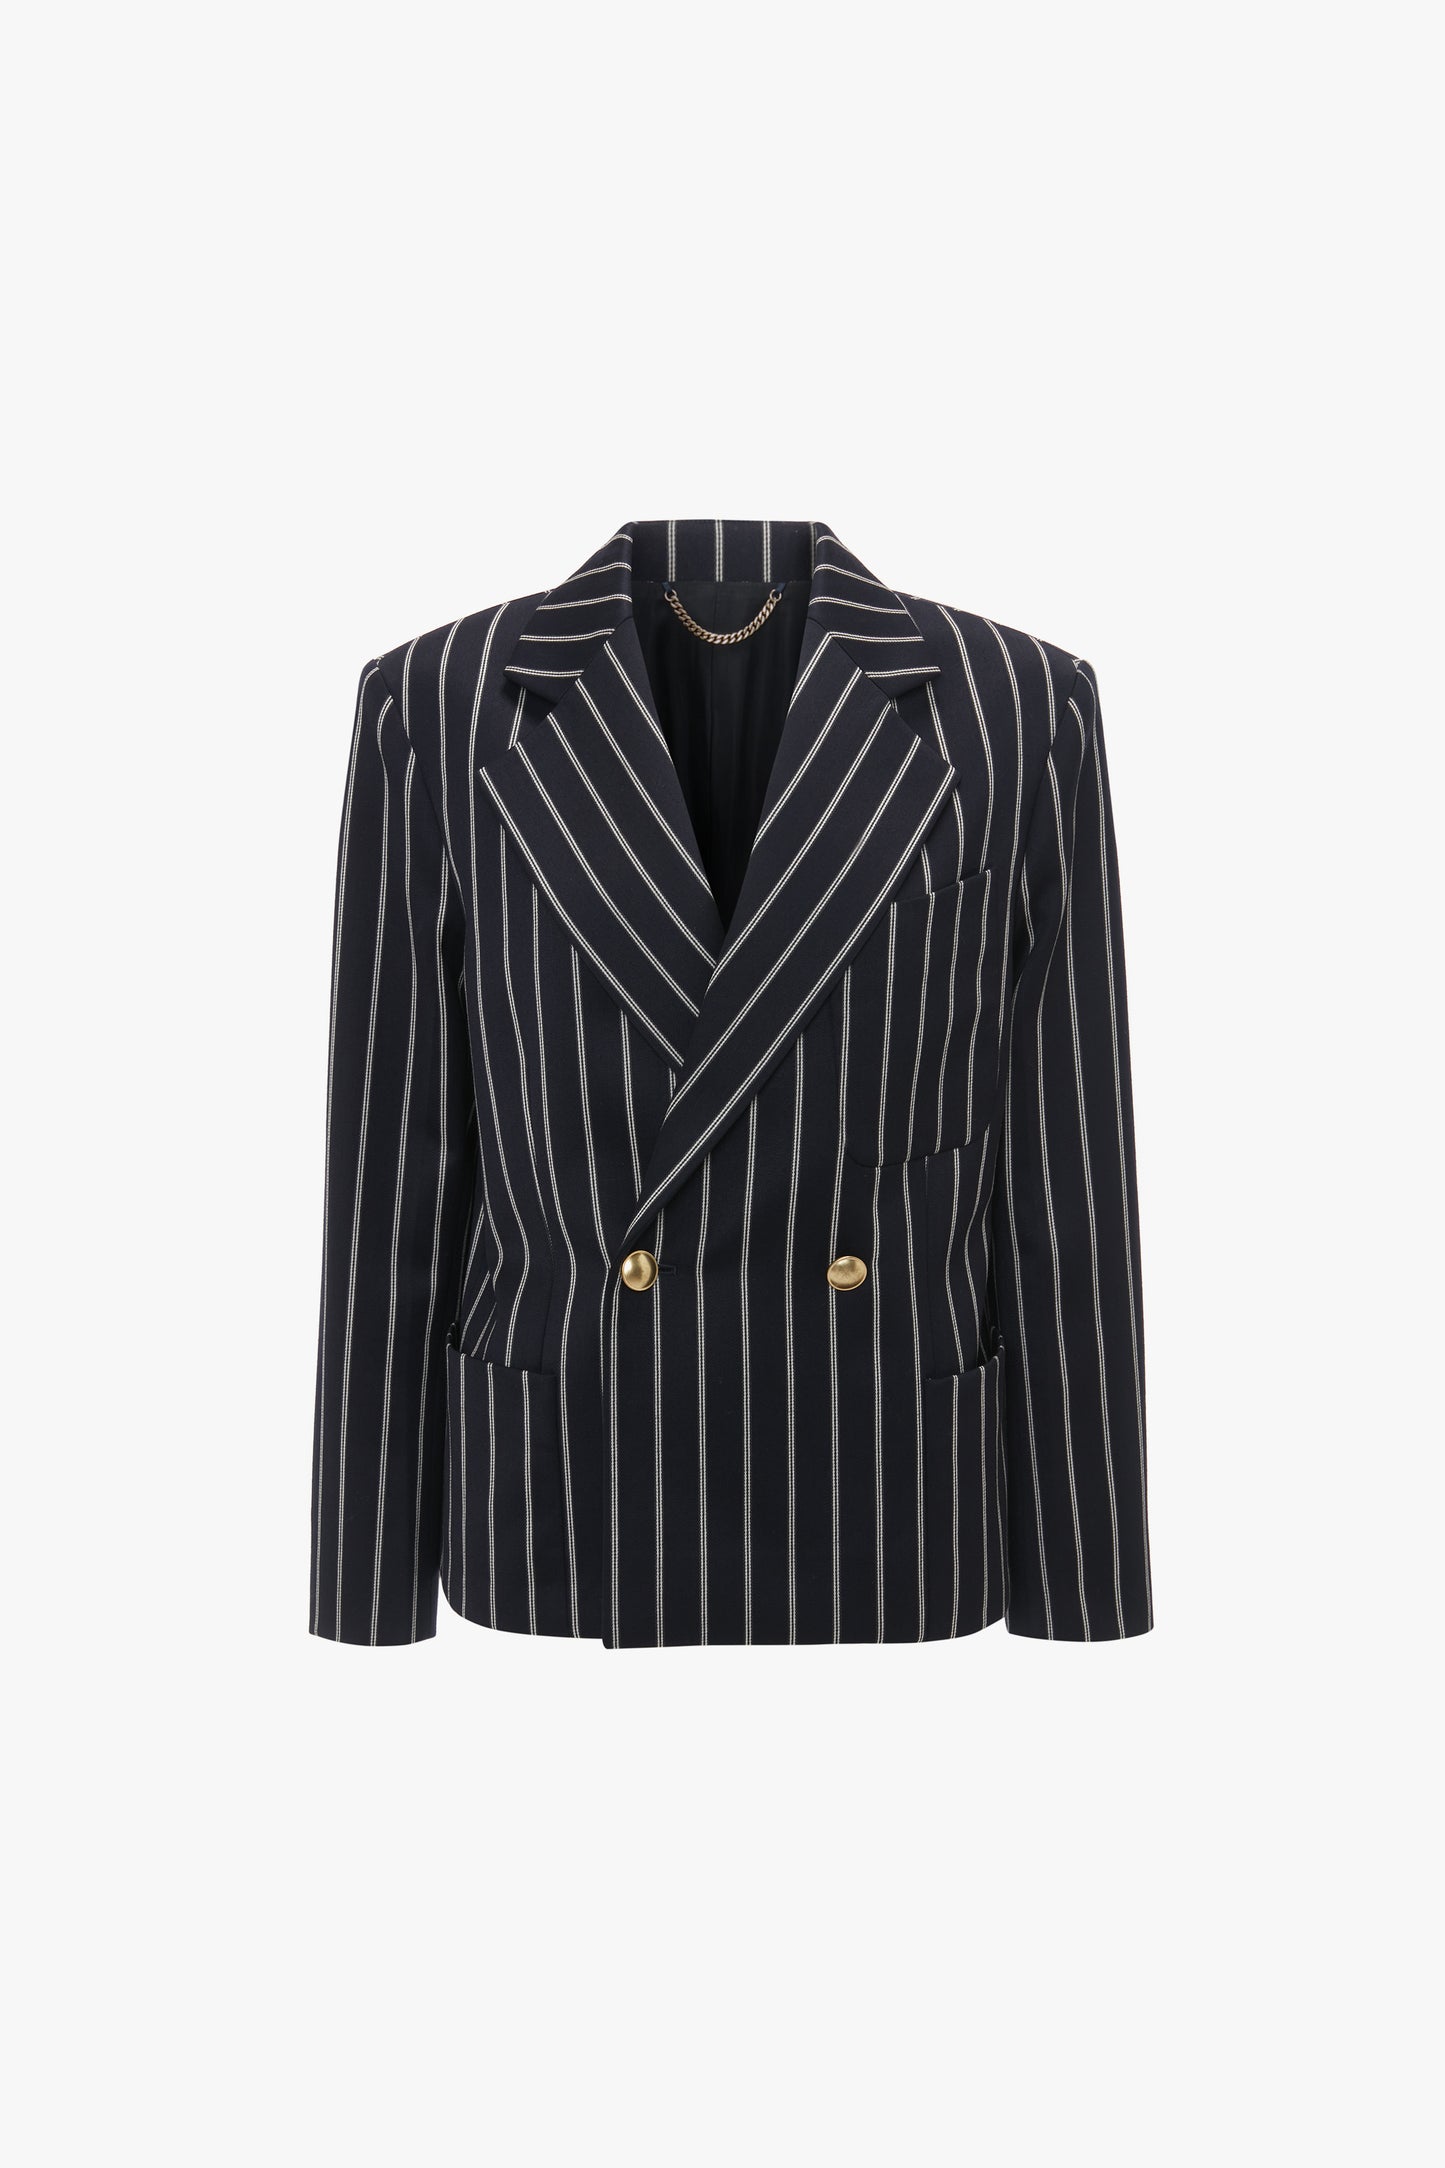 A Cropped Double Breasted Jacket In Midnight-White by Victoria Beckham with gold buttons, and a notched lapel exuding contemporary flair.